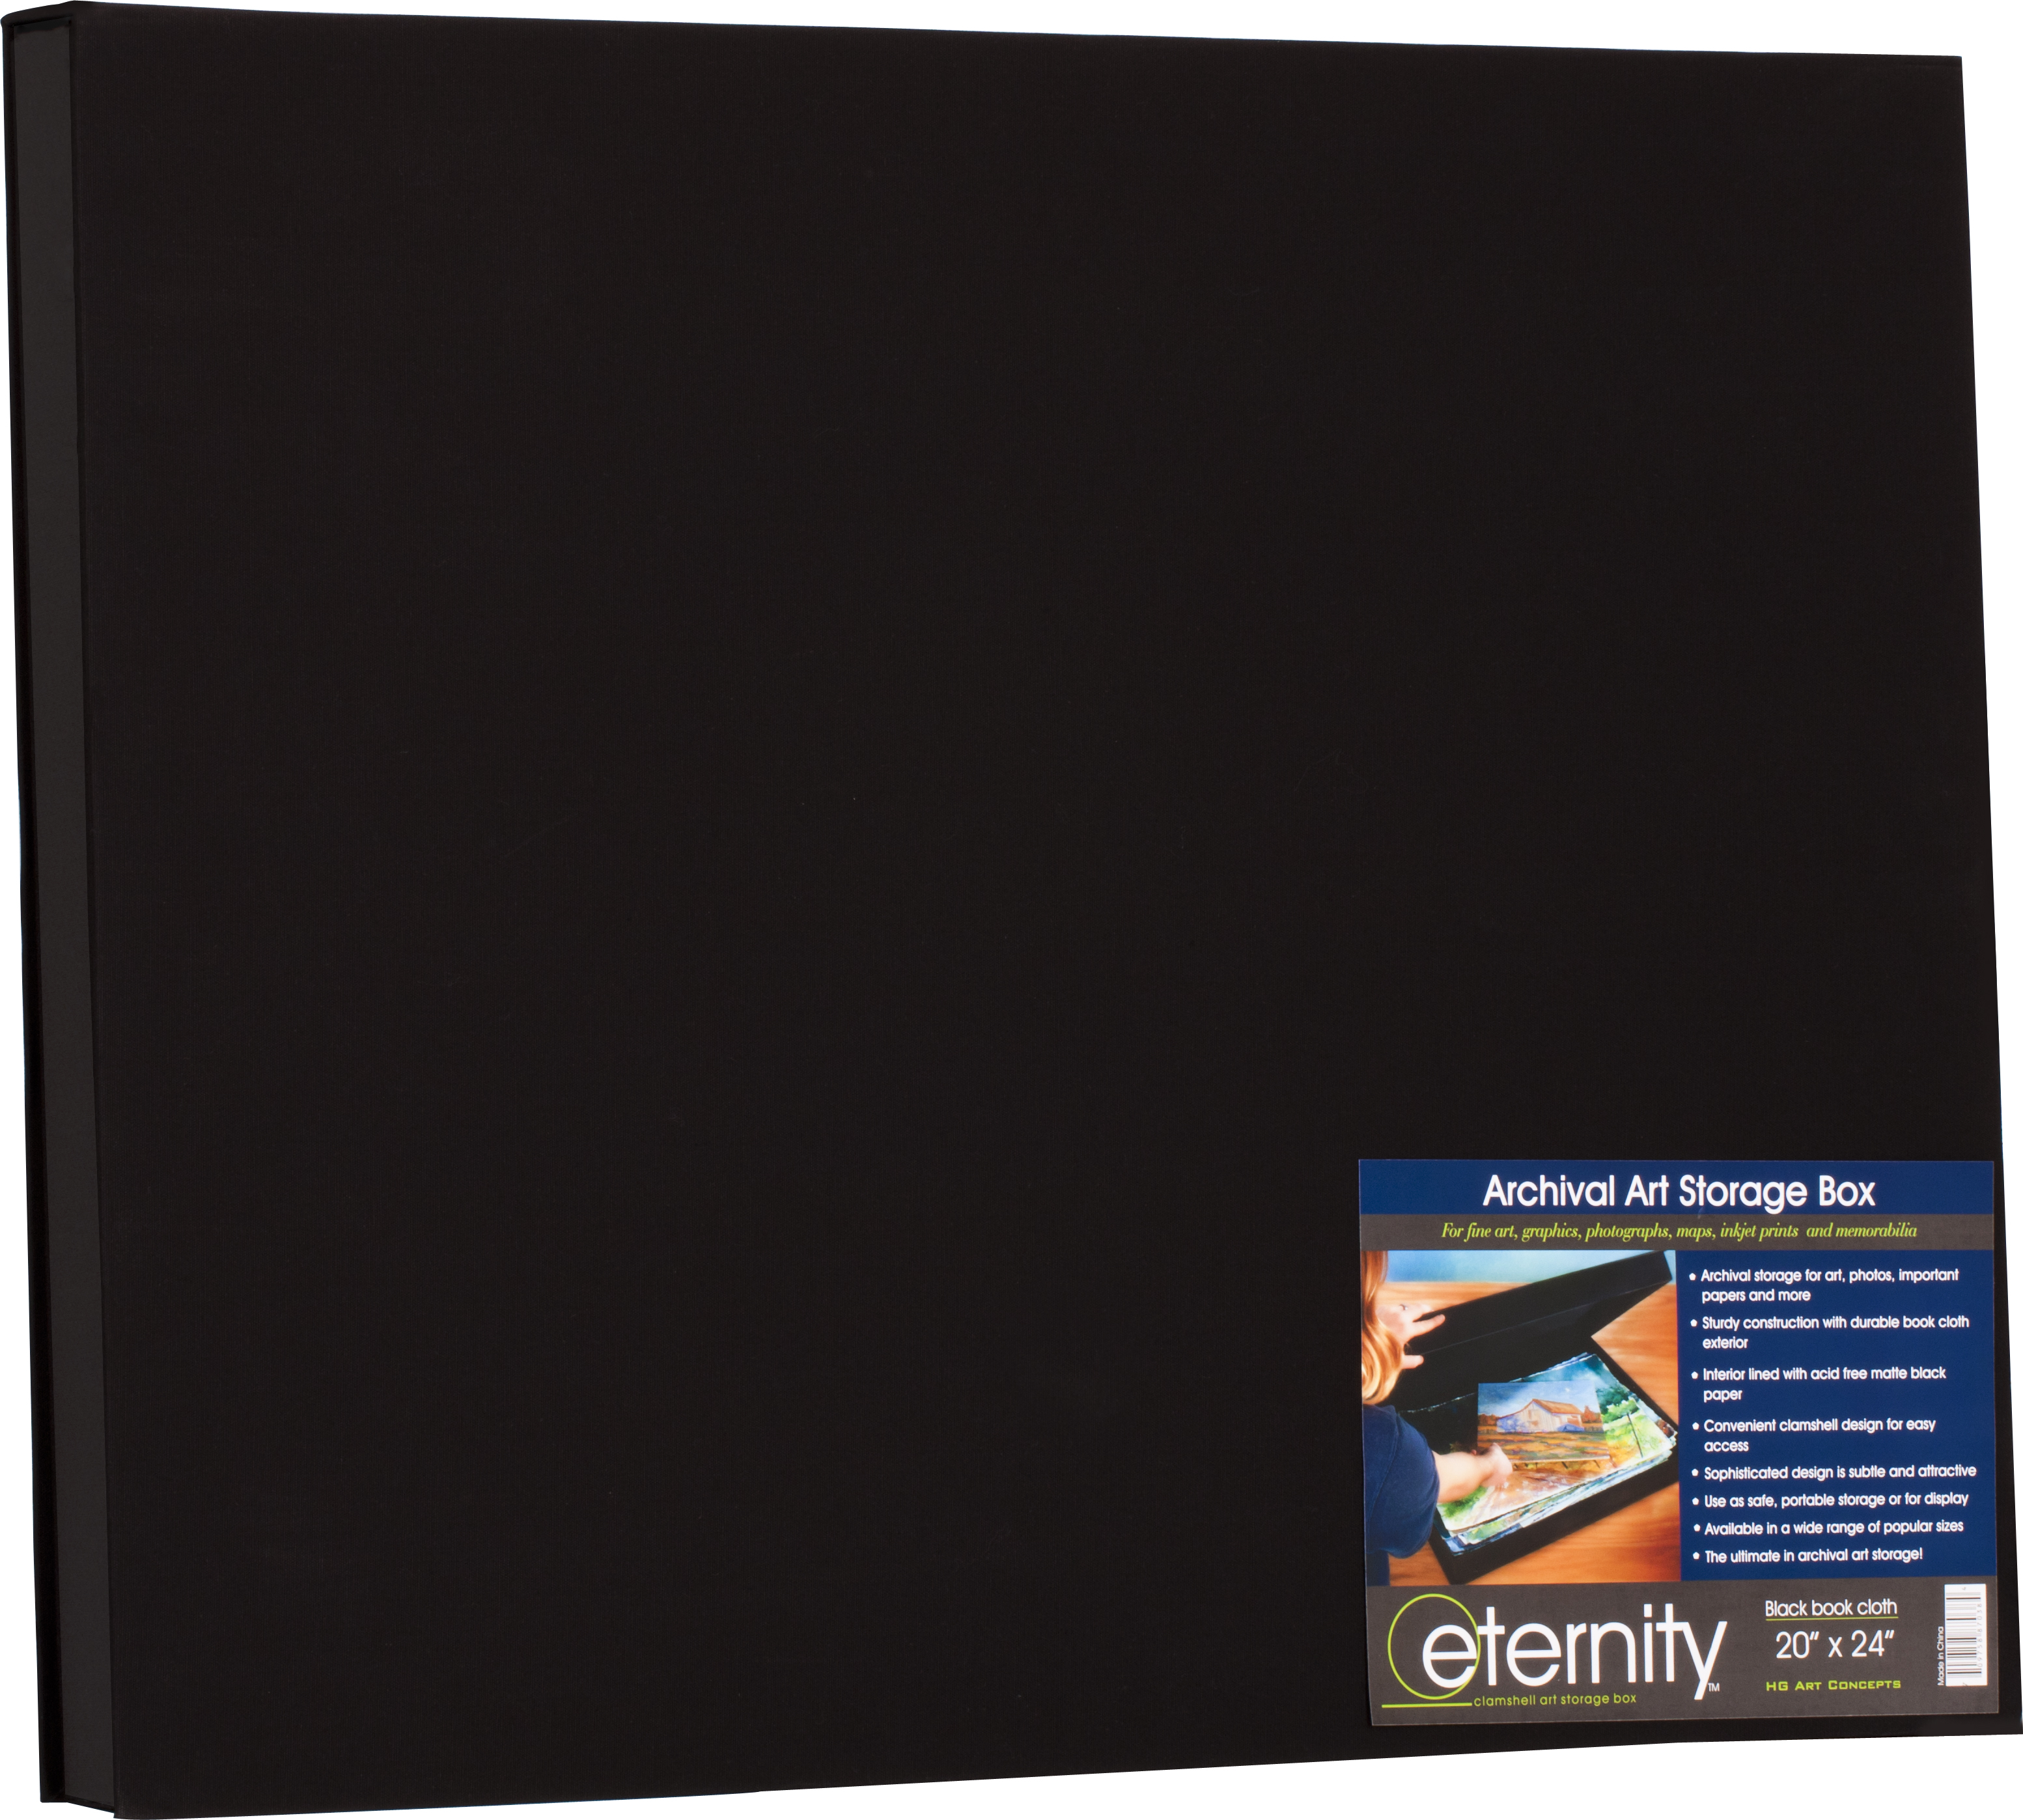 HG Concepts Art Photo Storage Box Eternity Archival Clamshell Box For Storing Artwork, Photos & Documents Deluxe Acid-Free Sturdy & Lined With Archival Paper - [Black - 20" x 24"] - image 1 of 3